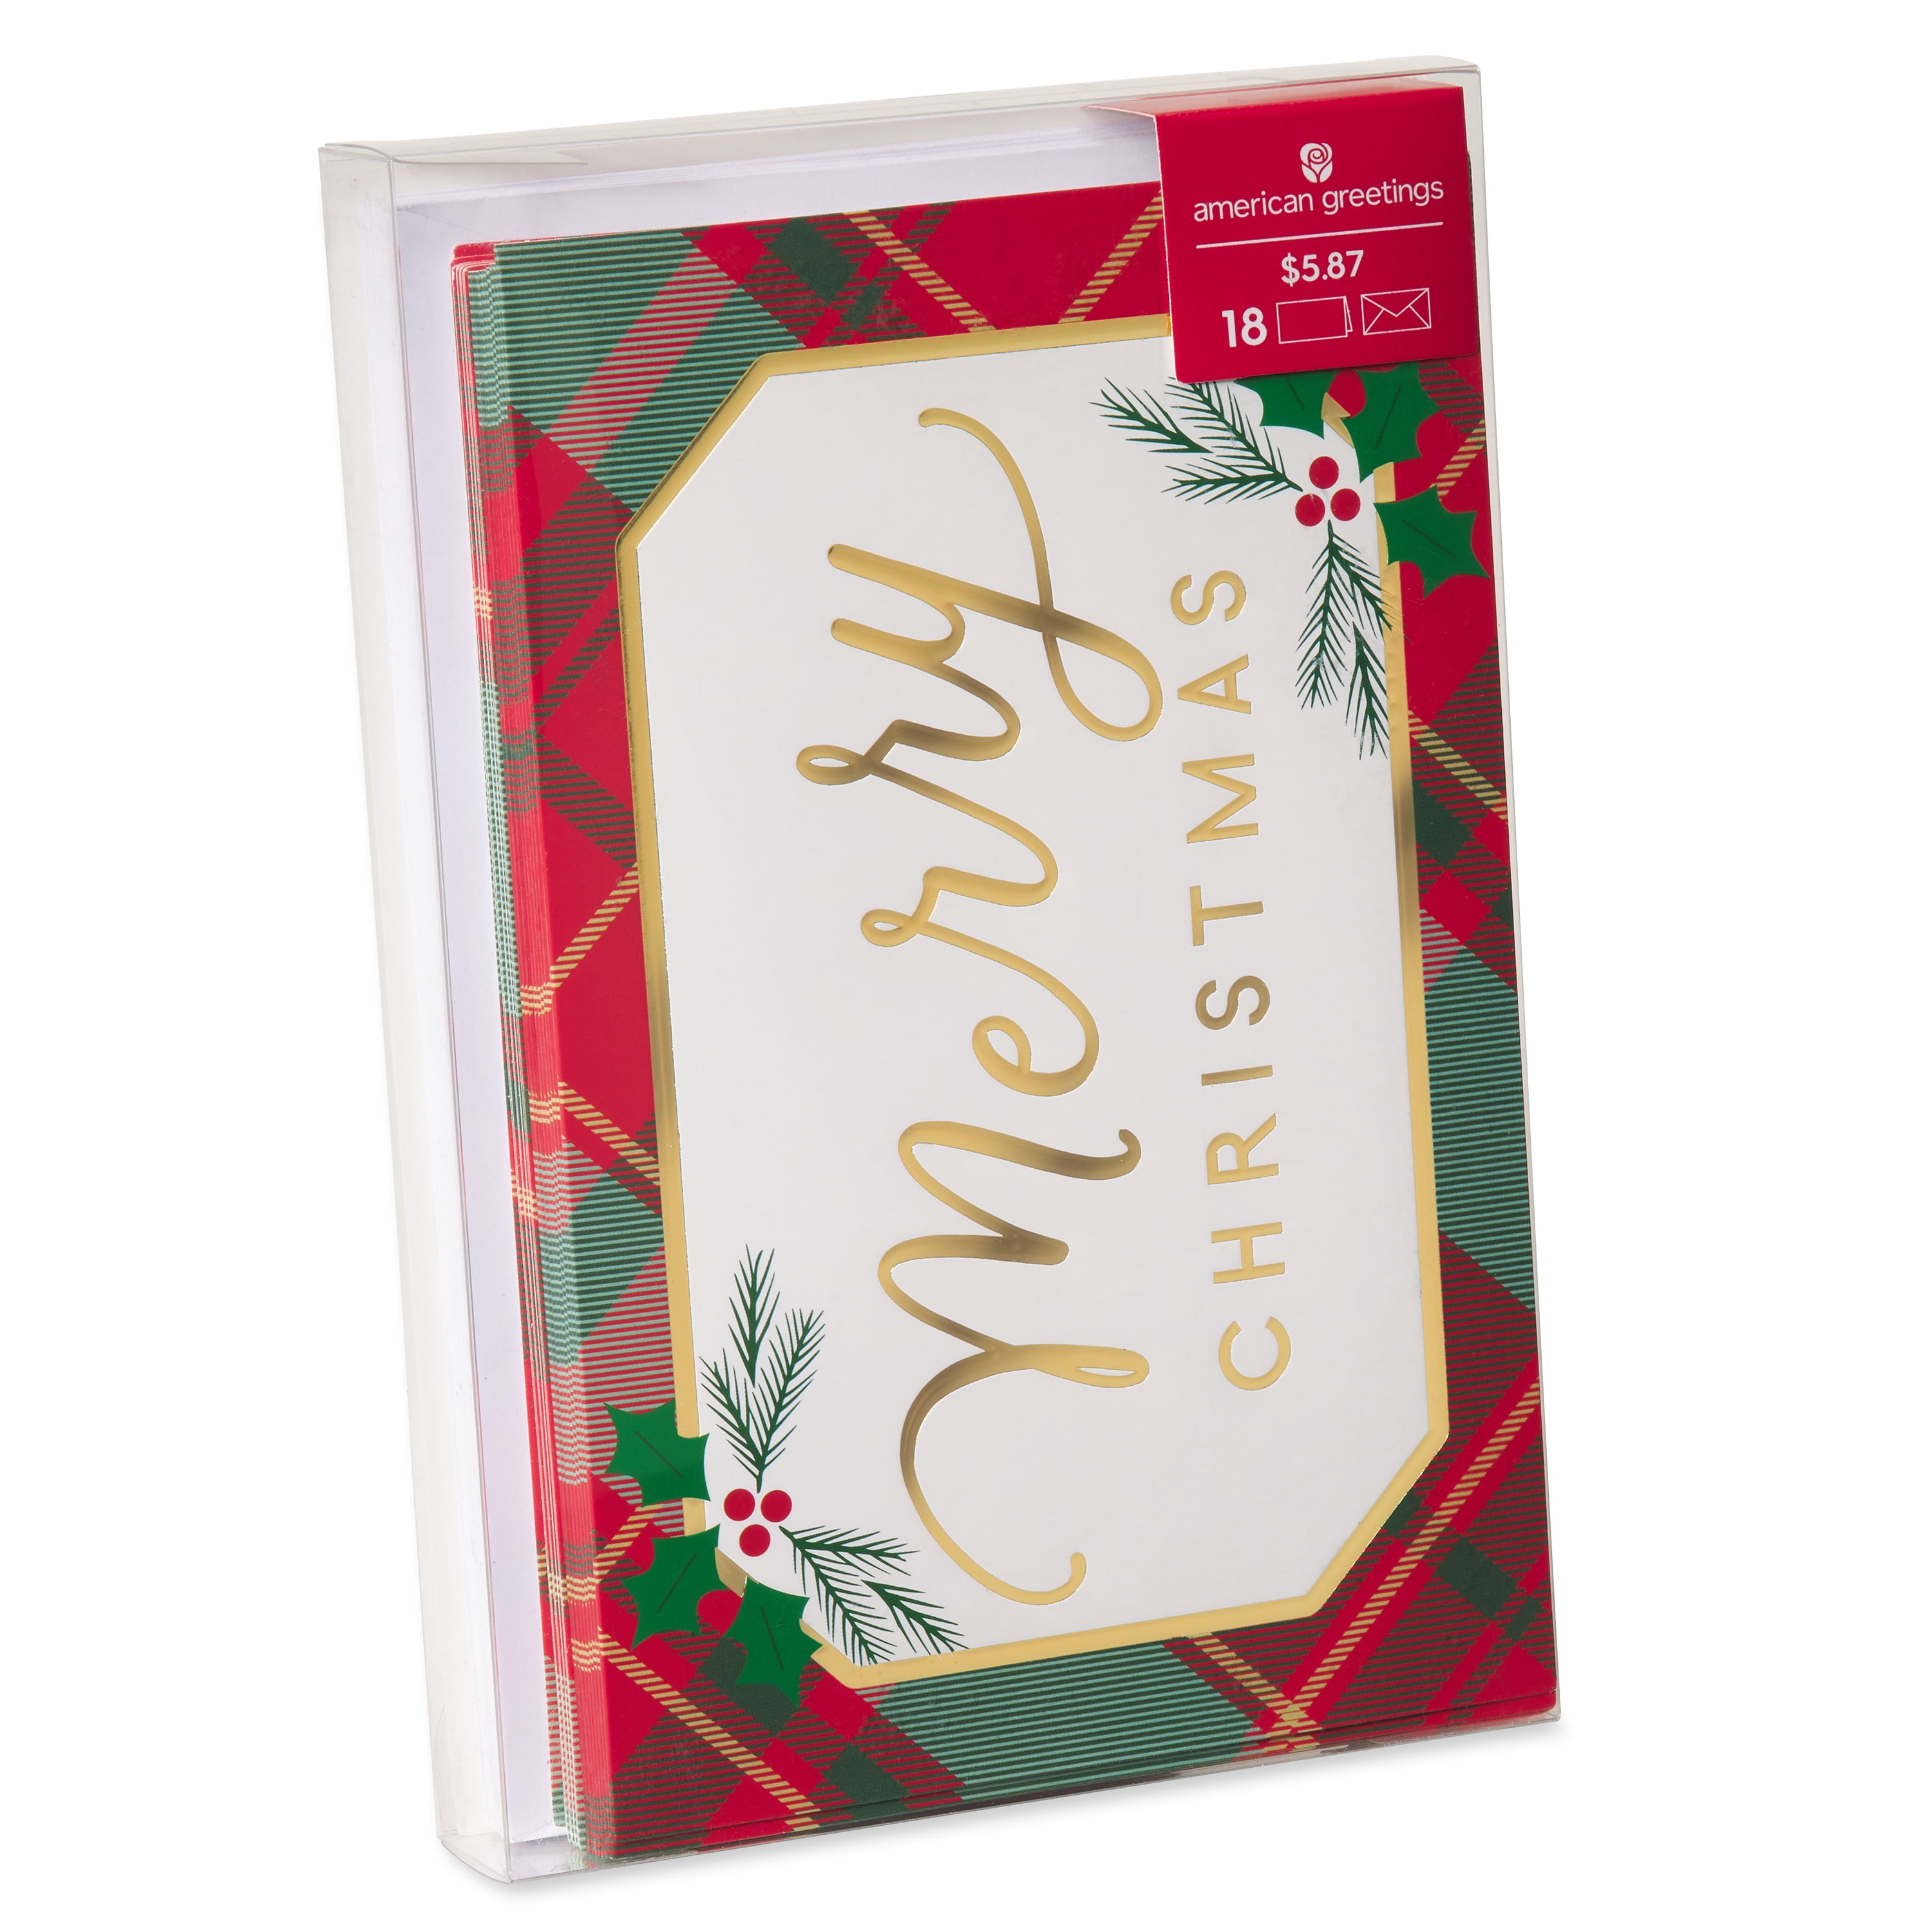 American Greetings Christmas Boxed Cards Holly and Mistletoe (Every Good Wish) 18-count